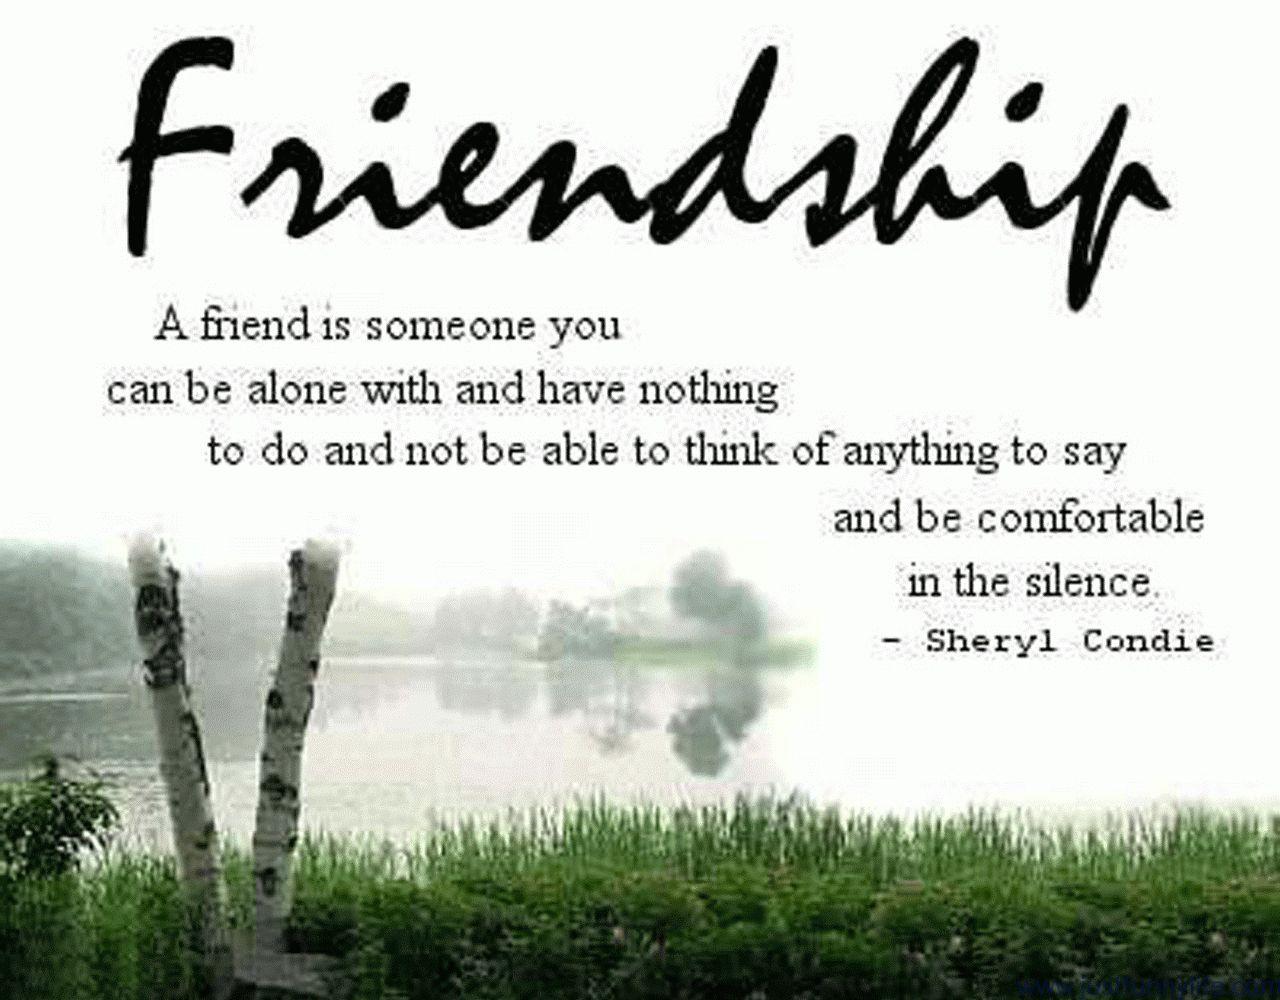 Cute Friendship Quote Wallpaper Justfunnylife. Quotes. Love